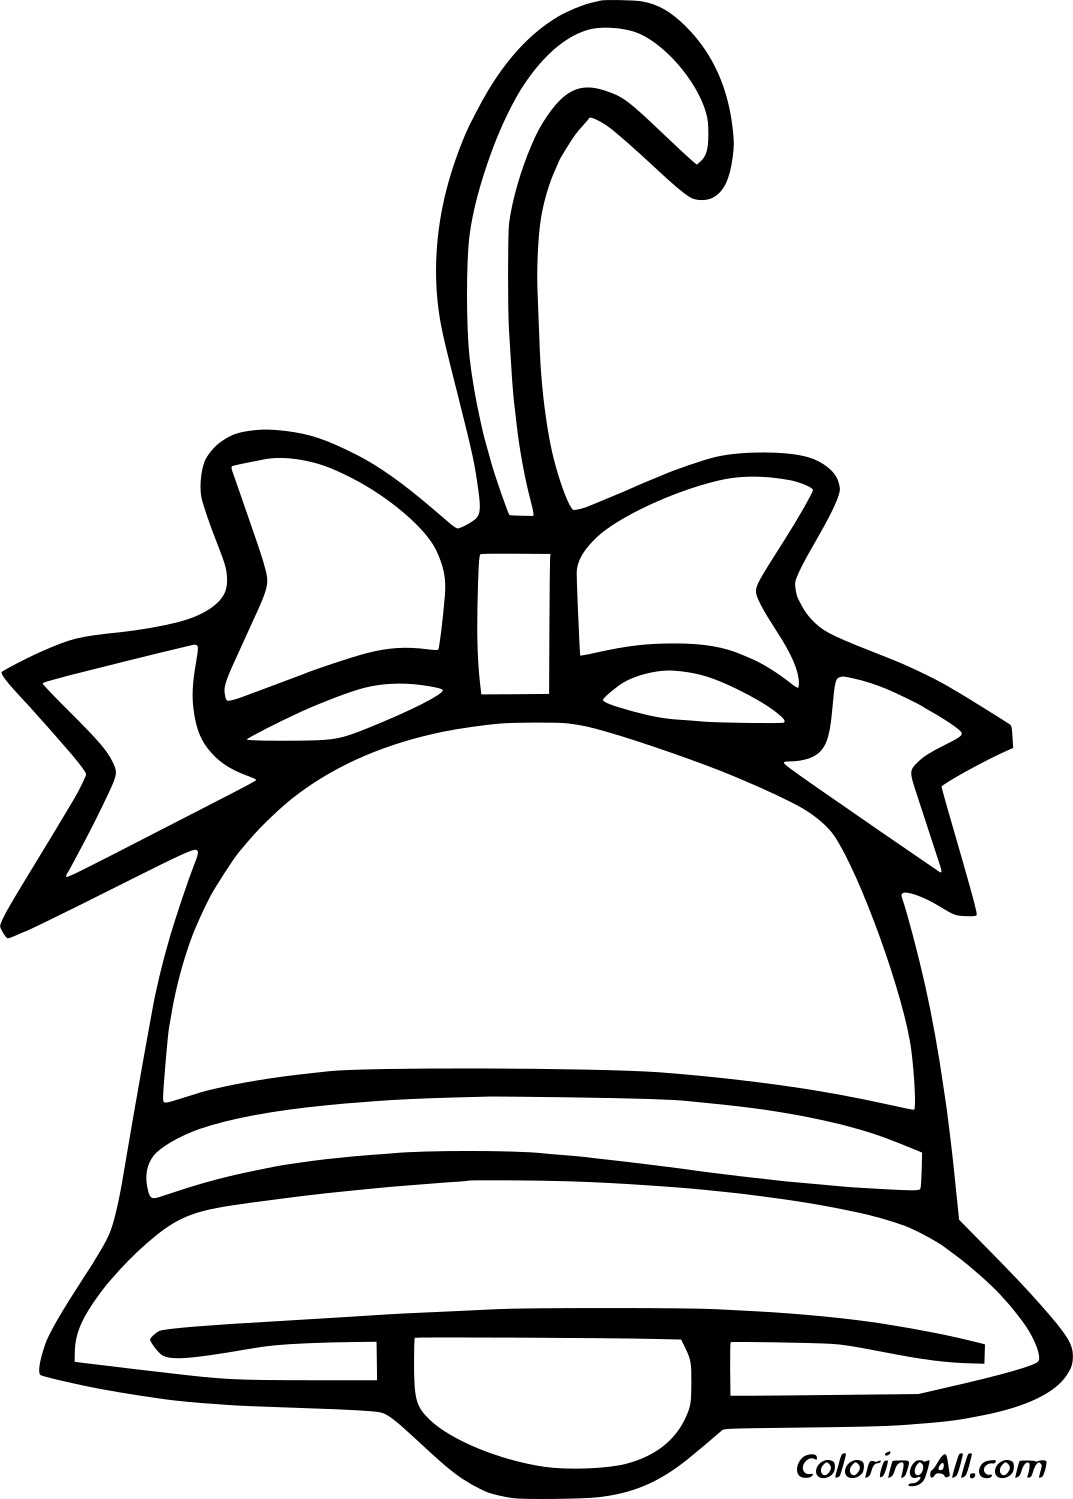 Simple Jingle Bell Coloring Page